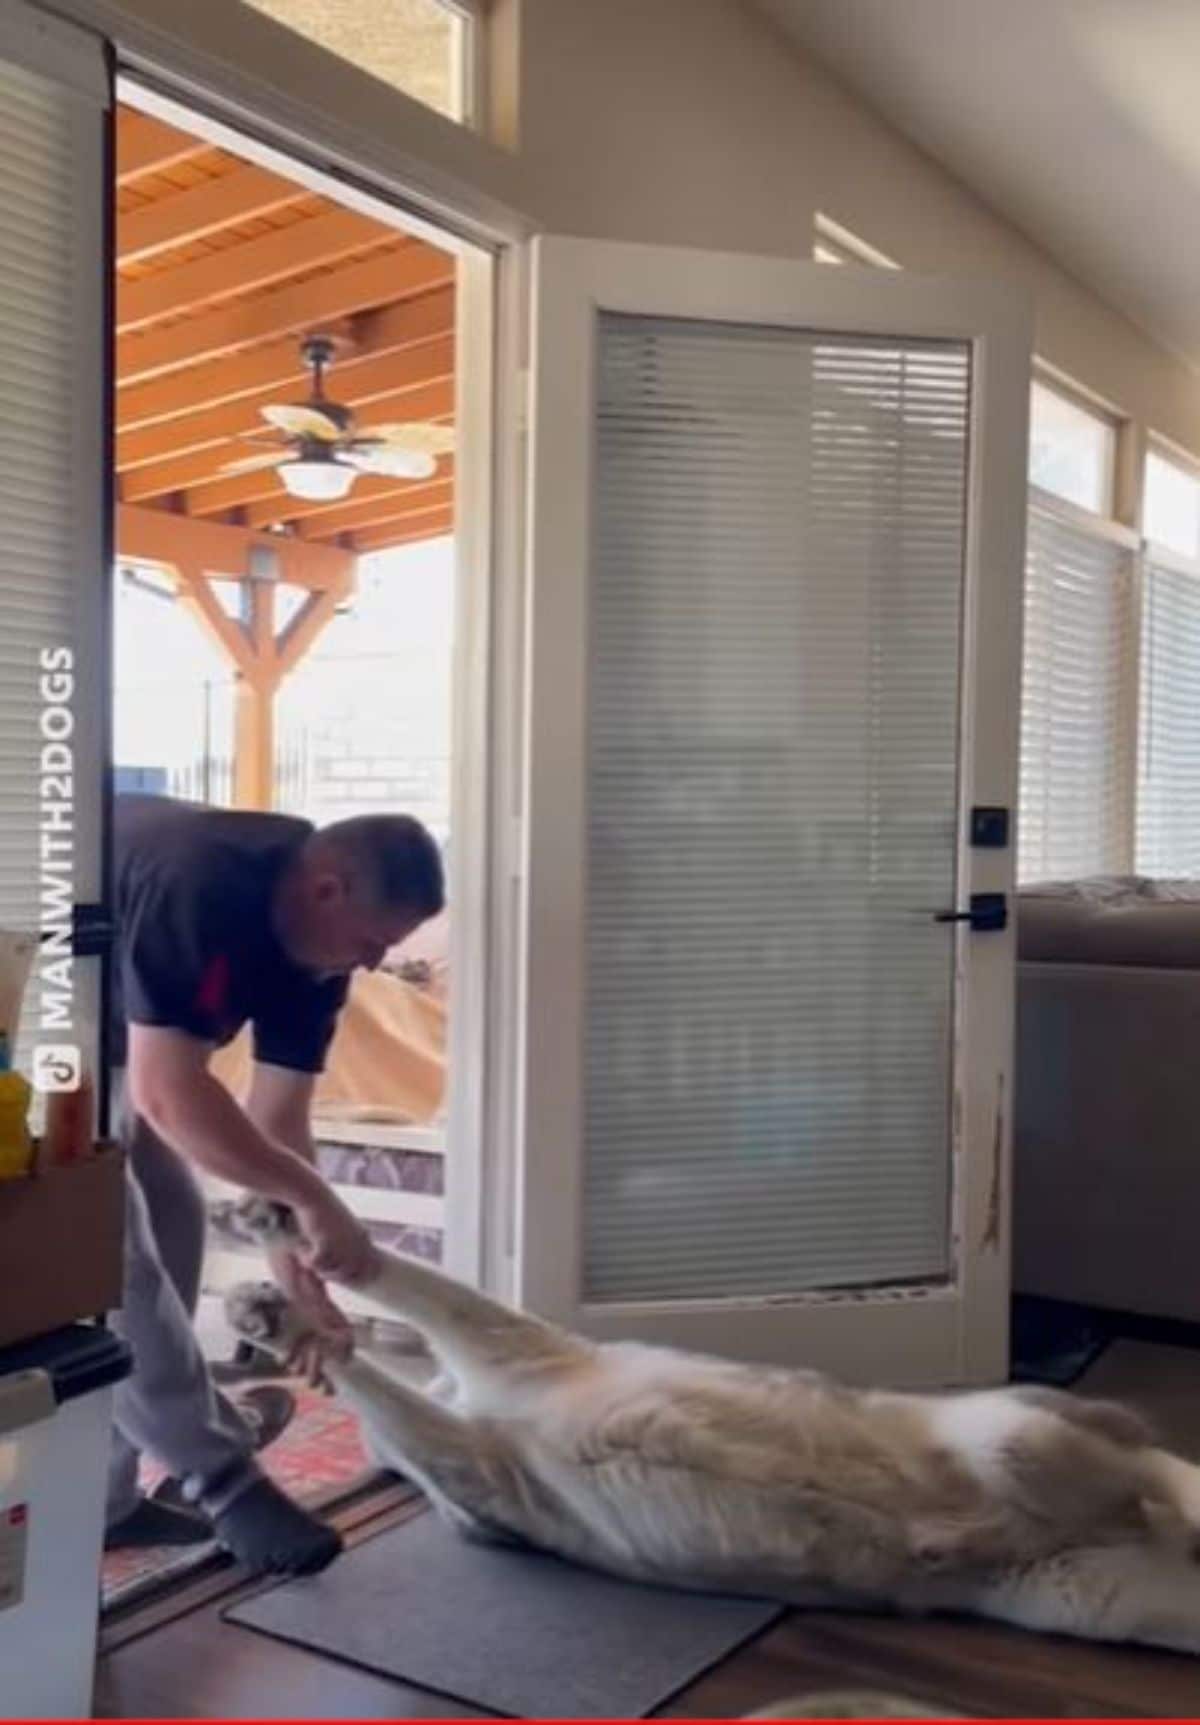 malamute getting dragged out by the front legs by a man